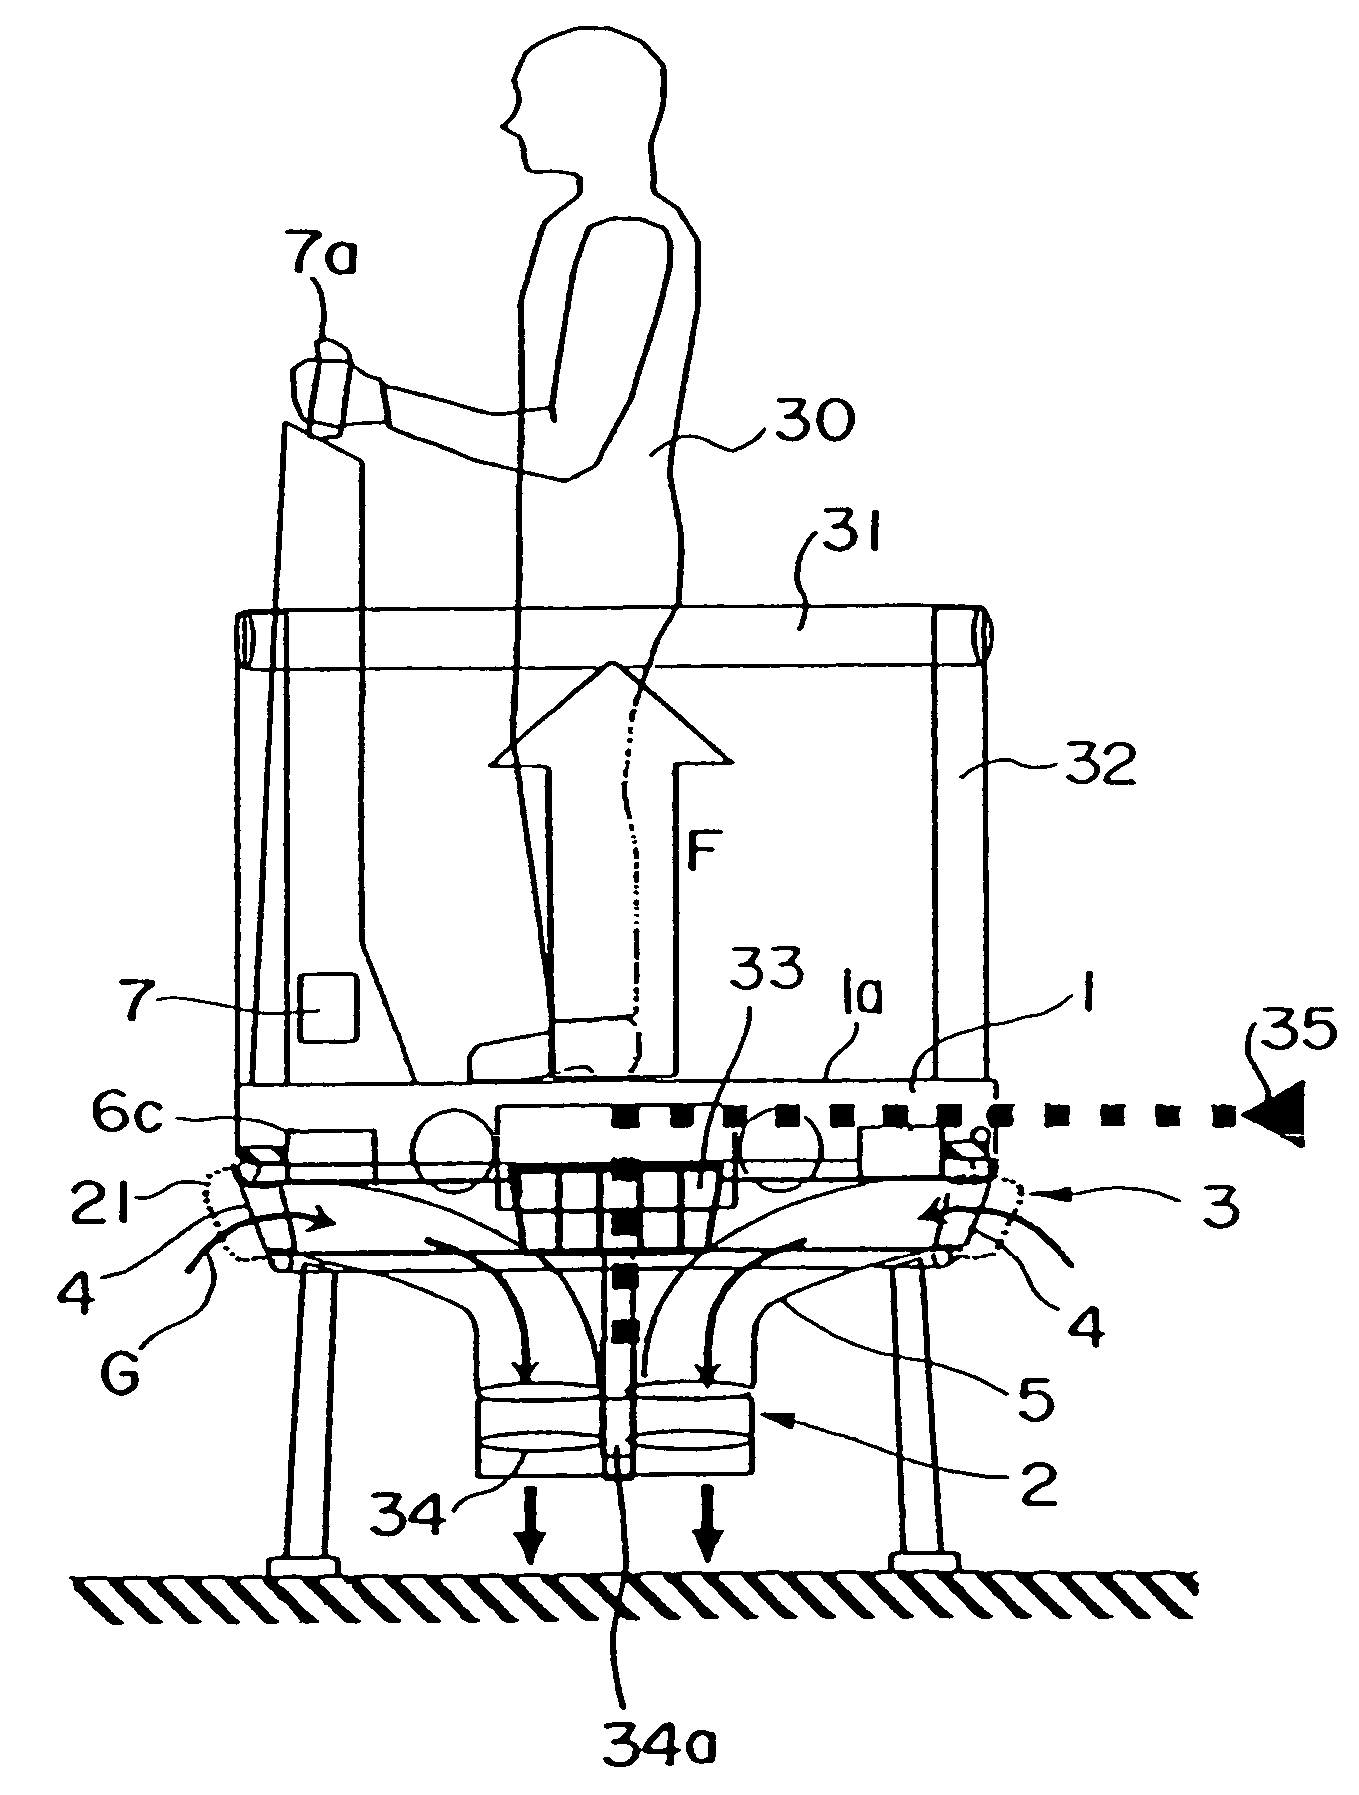 Vertical takeoff and landing apparatus